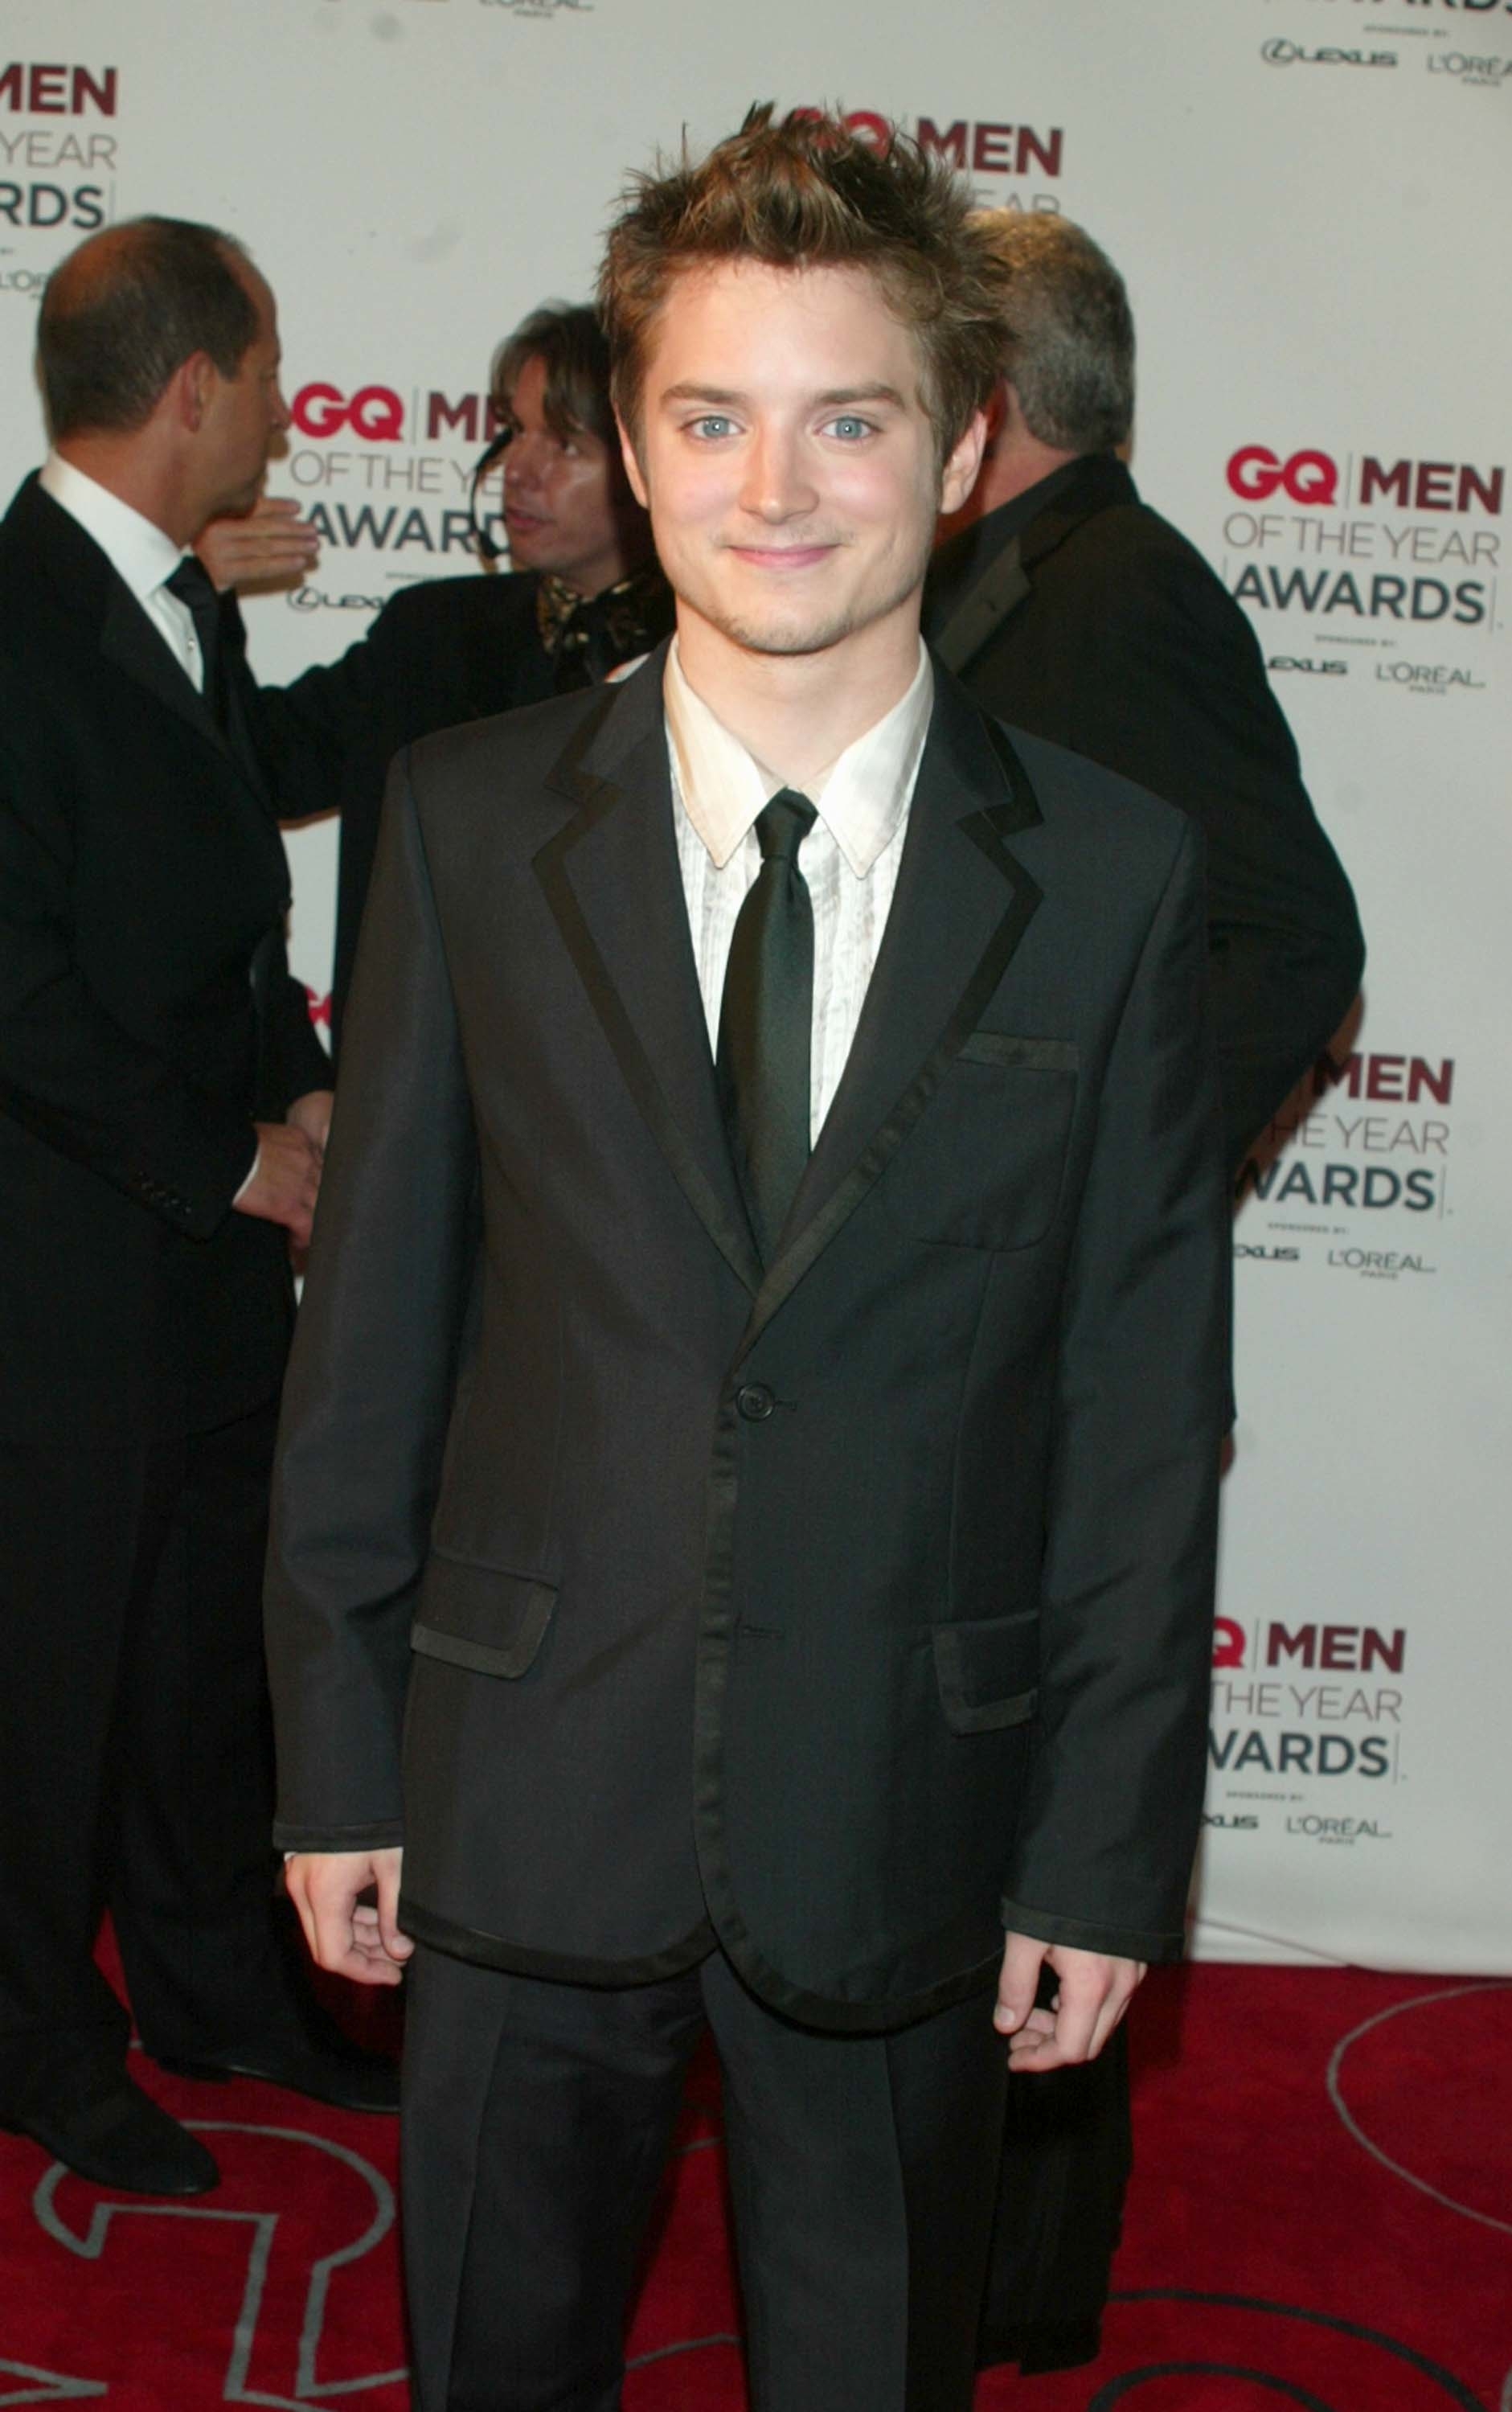 Smiling in a suit and tie on the red carpet